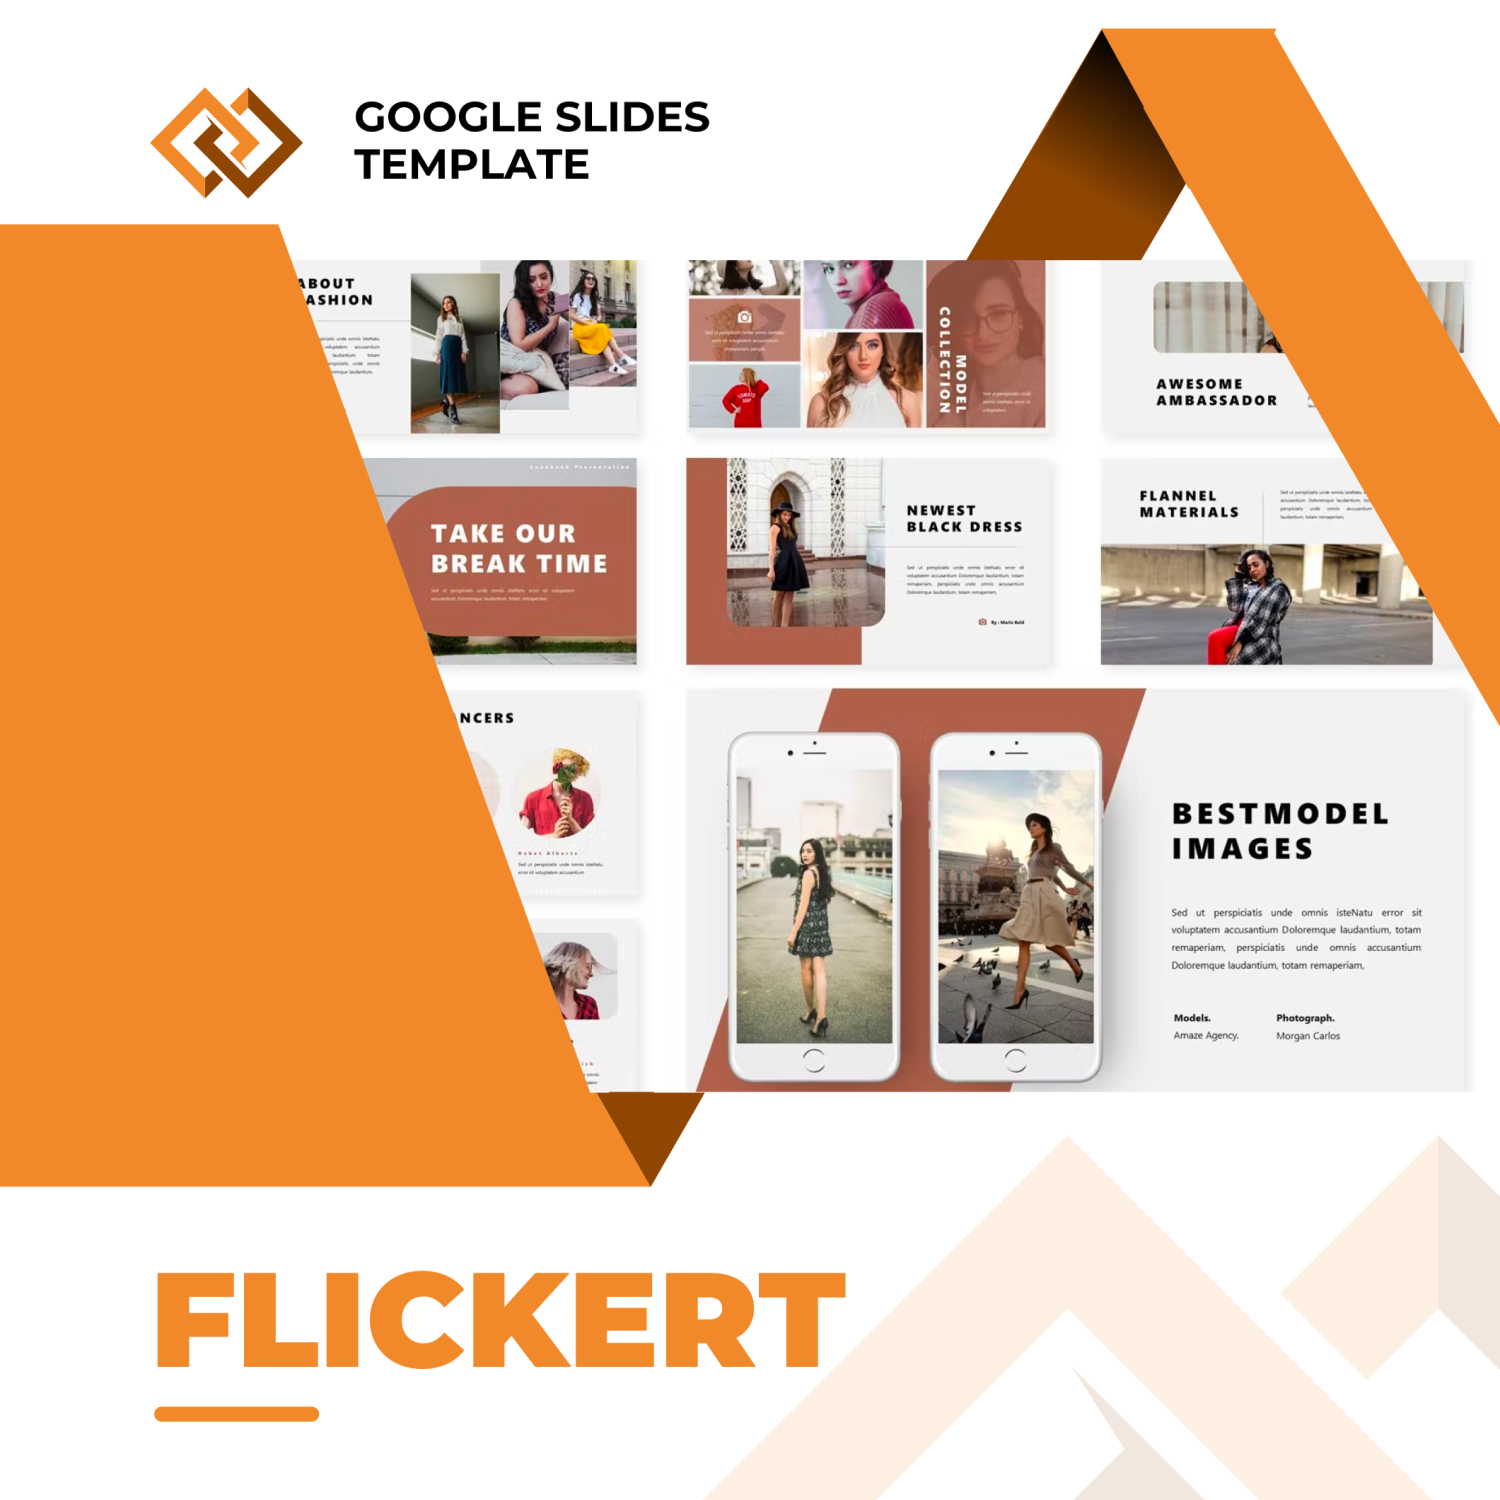 Preview images flickert google slides template.